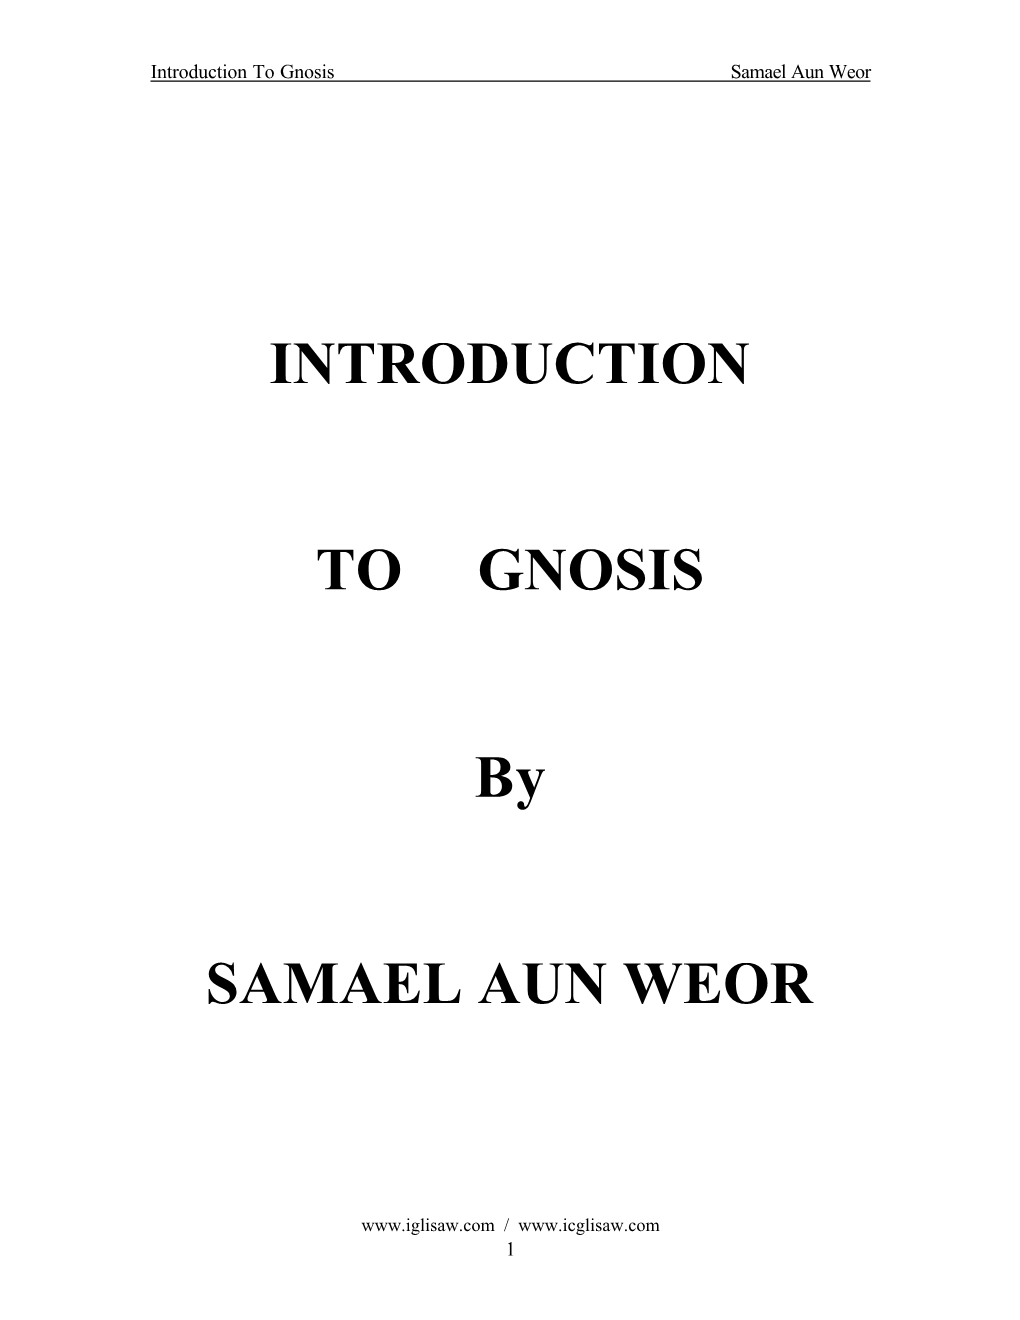 INTRODUCTION to GNOSIS by SAMAEL AUN WEOR